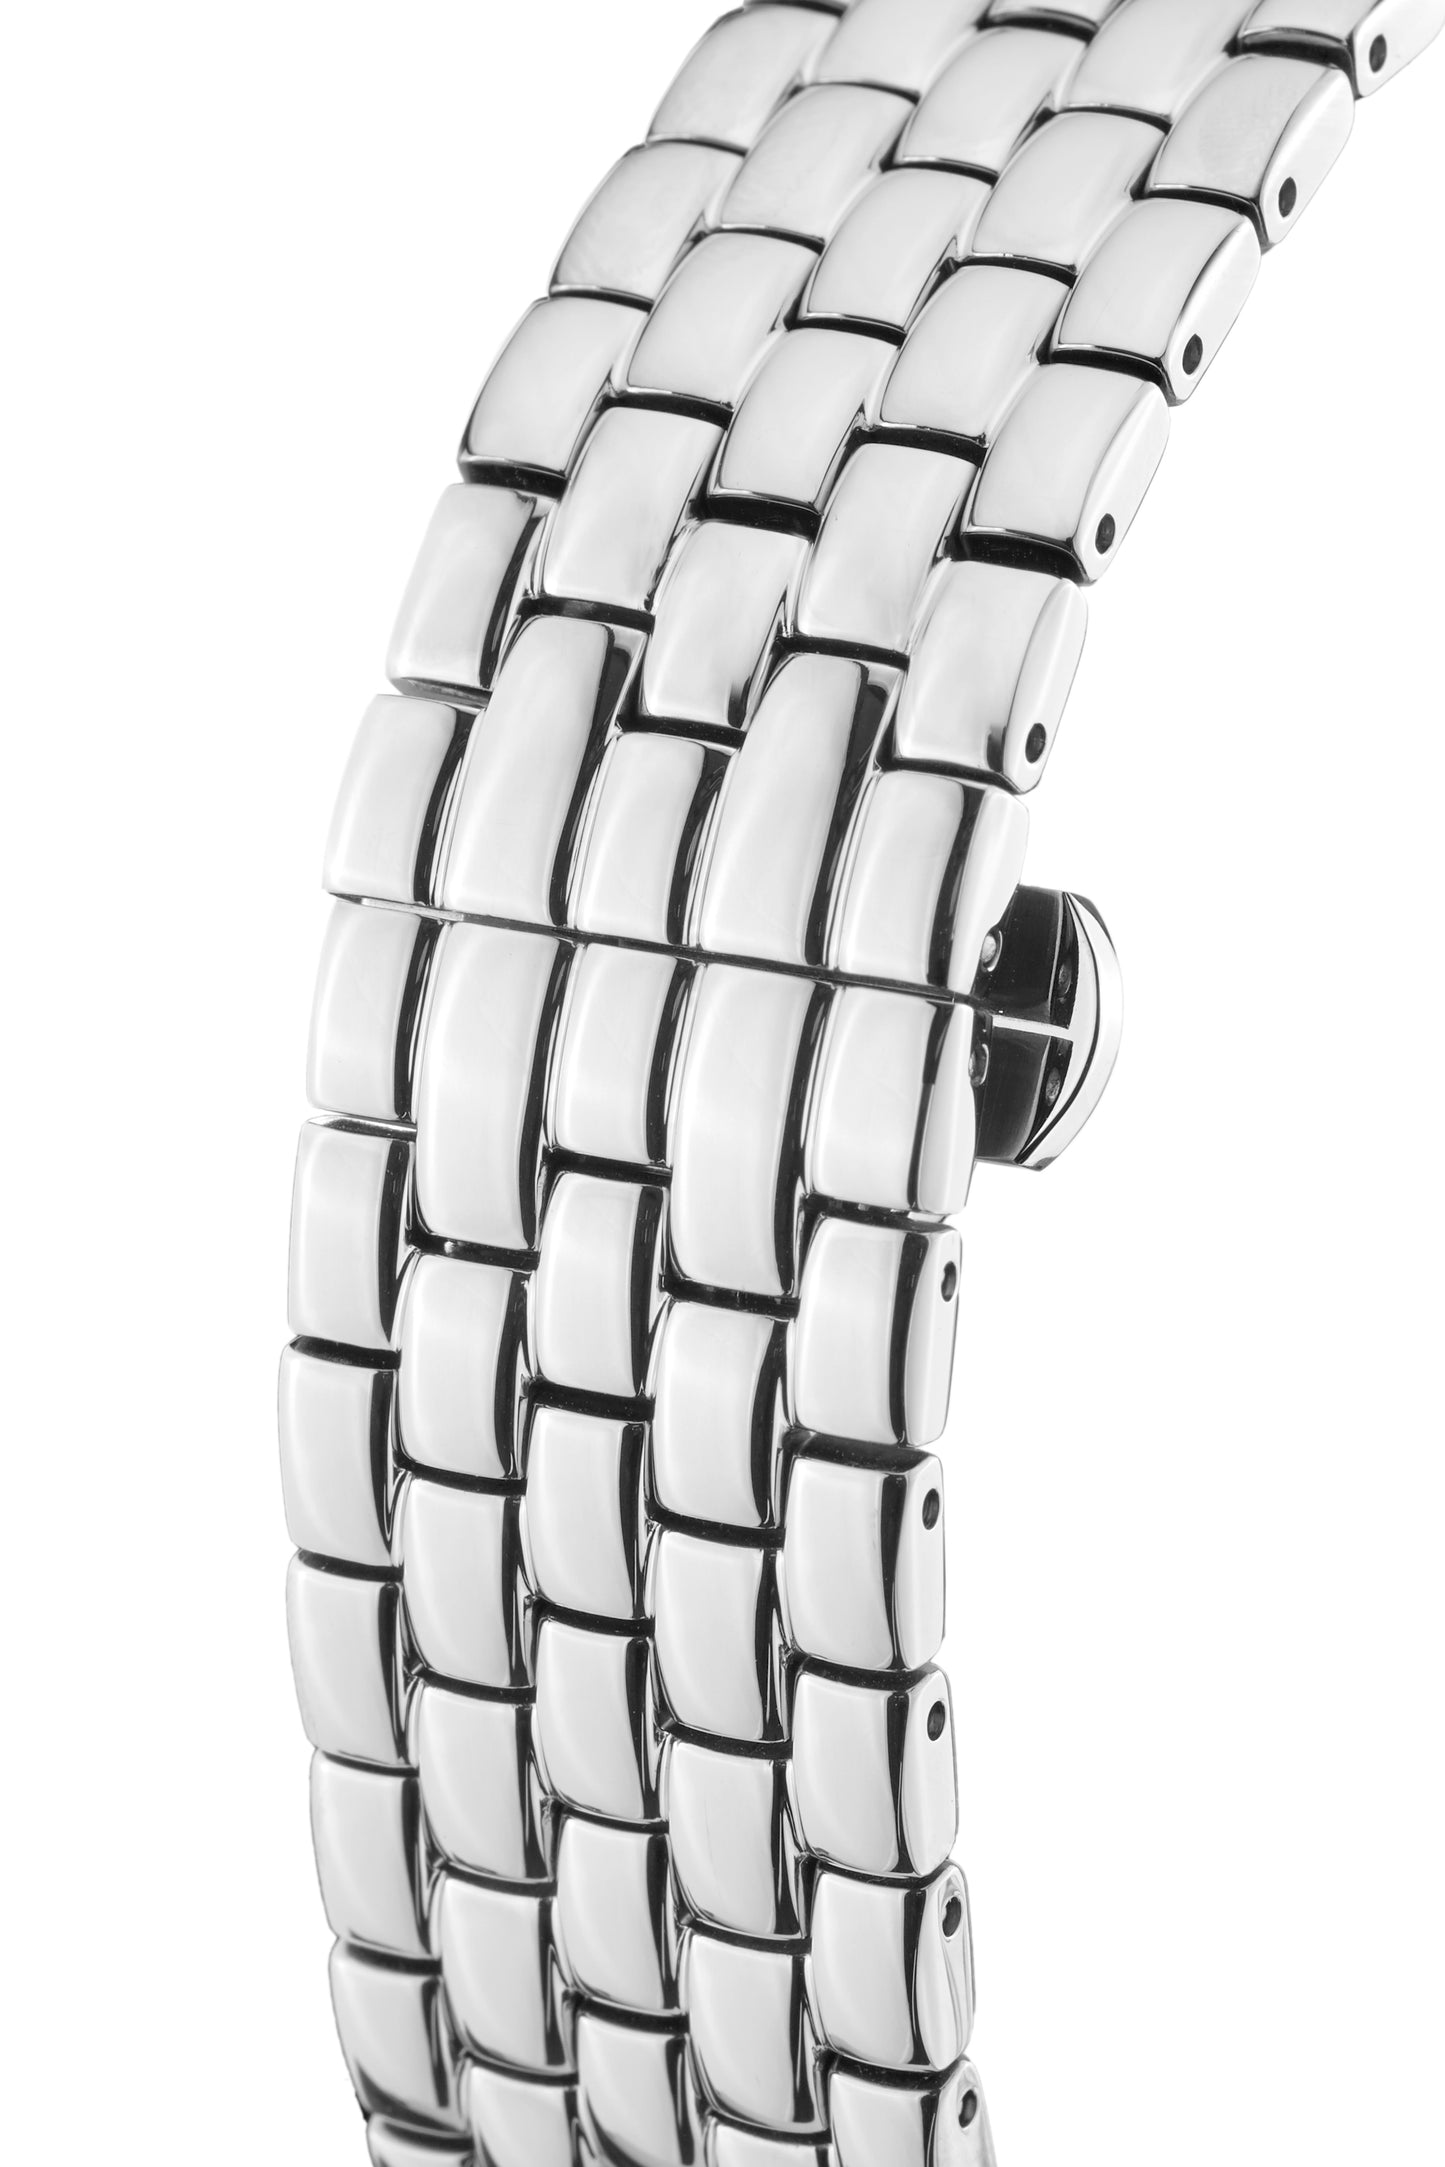 bracelet watches — steel band Intemporelle — Band — silver steel